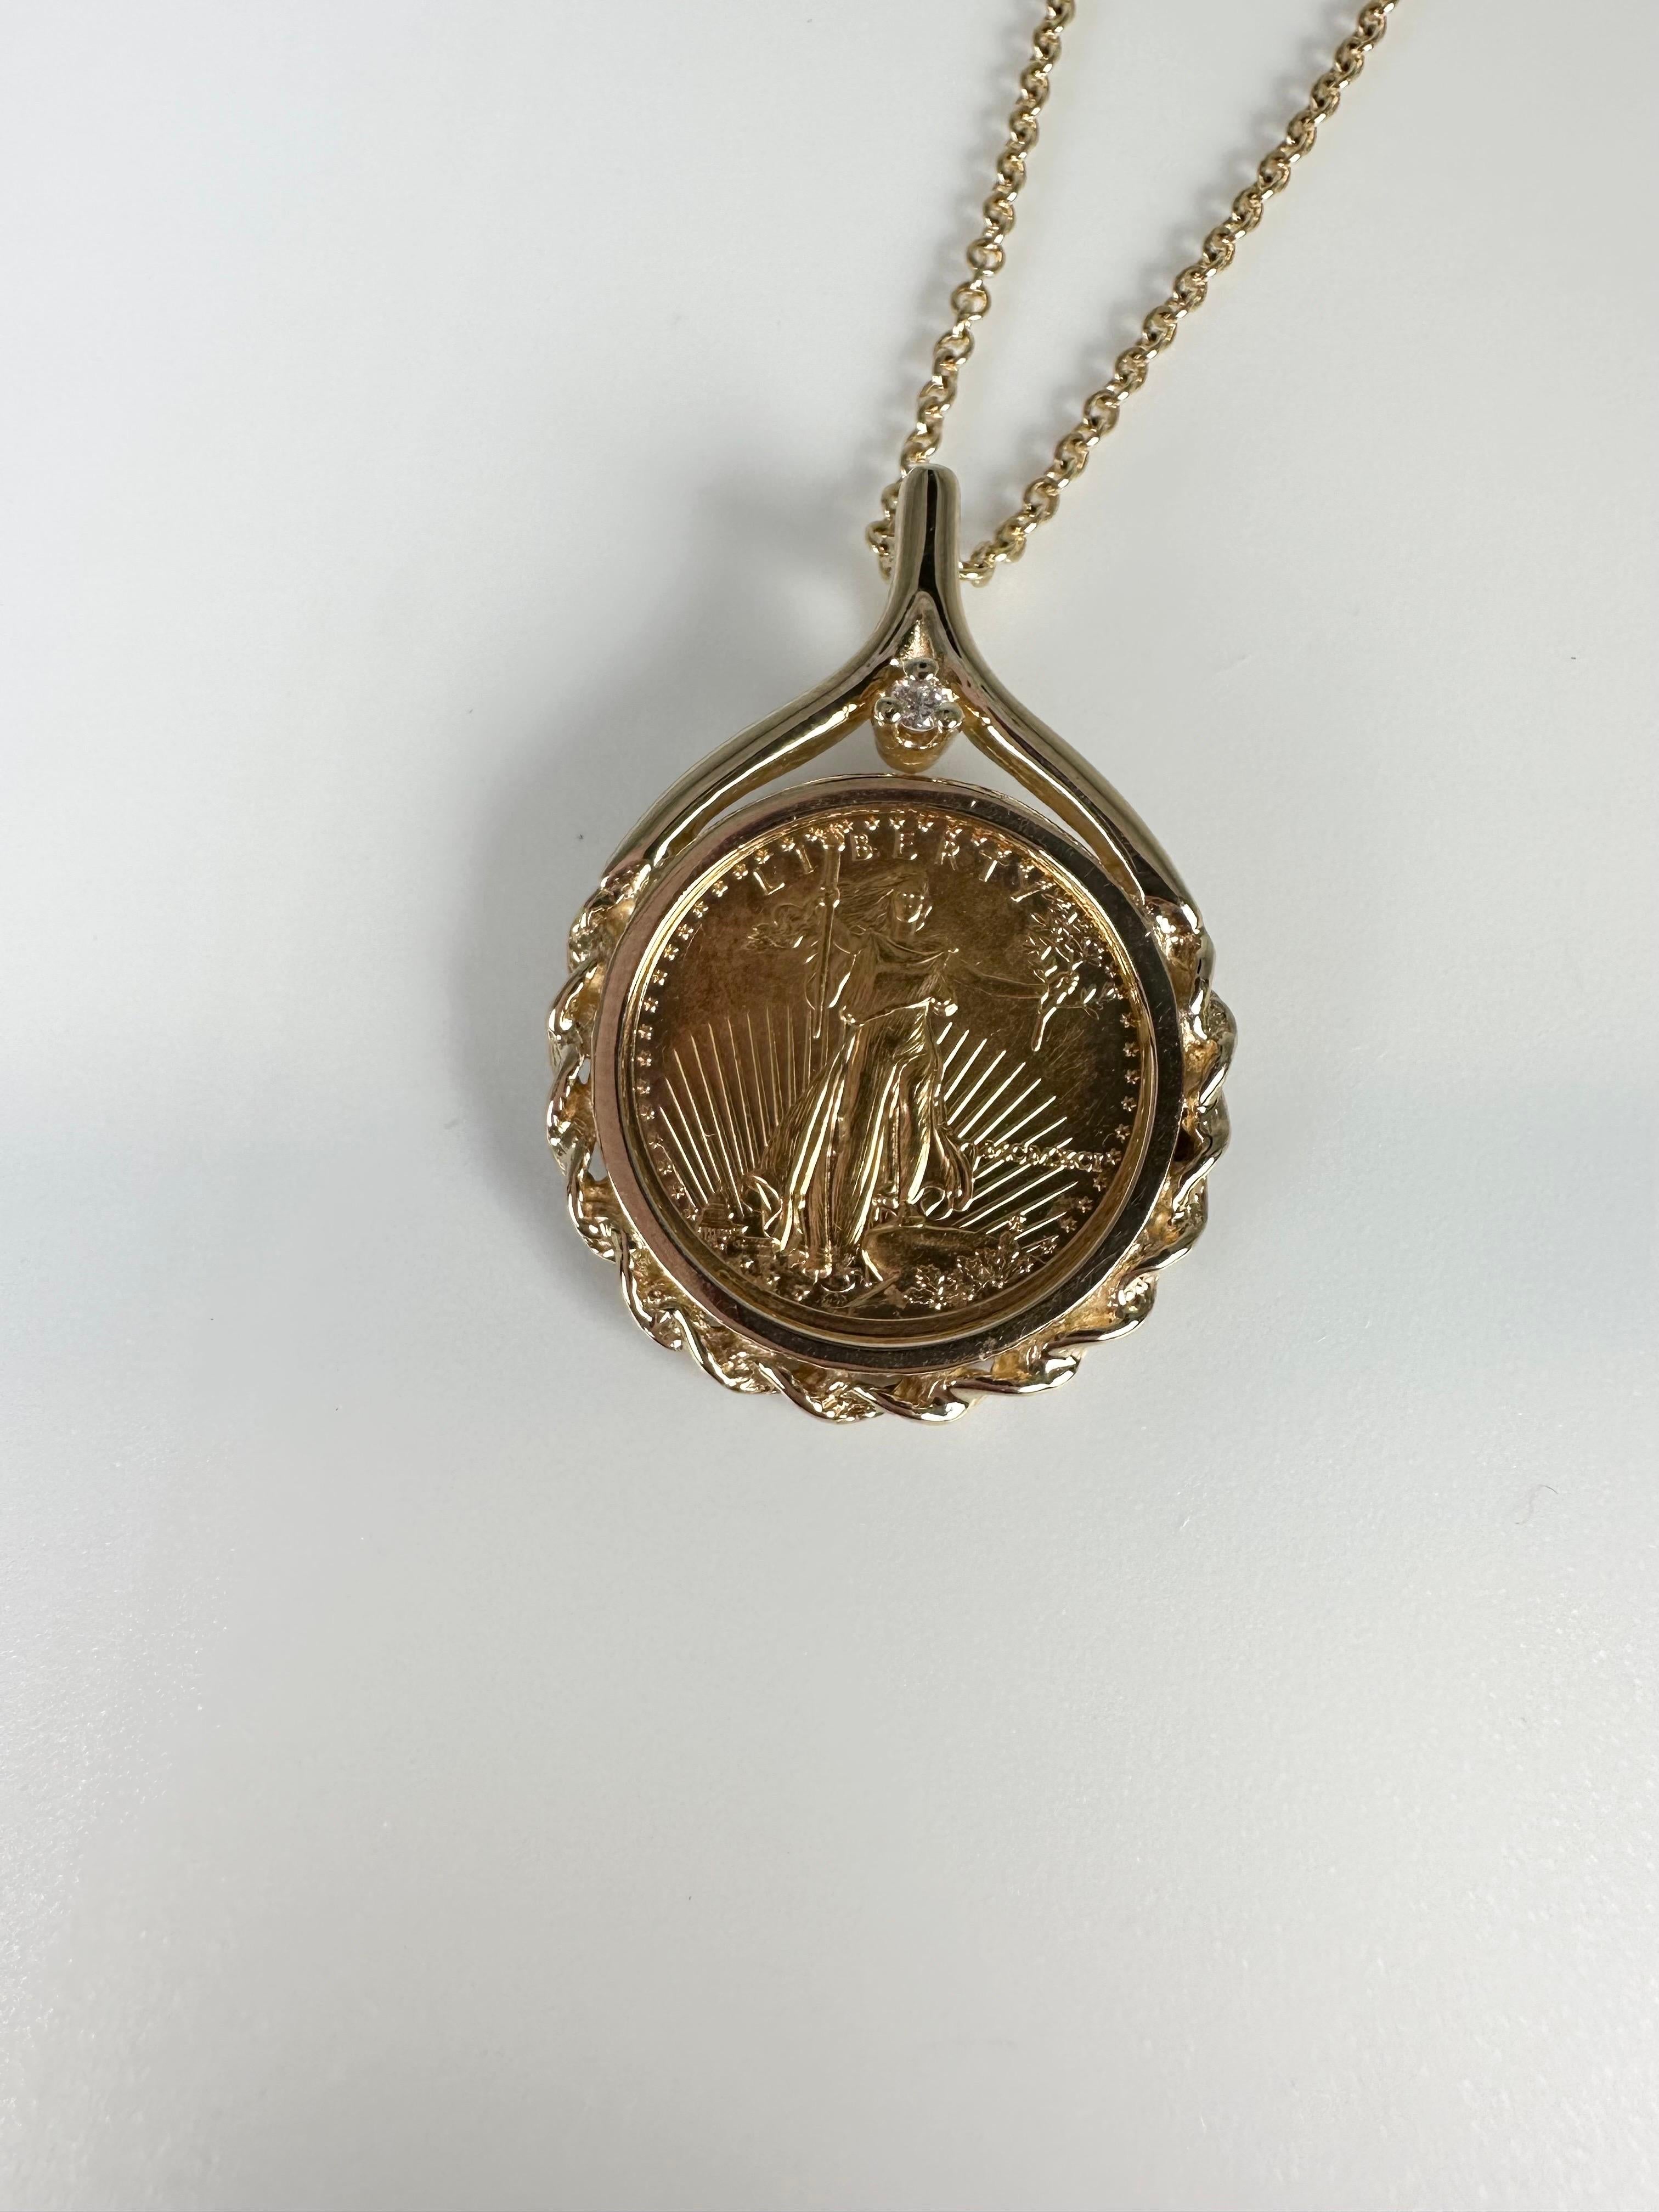 Unique gold pendant in 14KT yellow gold weighing 6.20 grams, a 5$ liberty coin pendant necklace. Chain is 18 inches long! (AKA)

WHAT YOU GET AT STAMPAR JEWELERS:
Stampar Jewelers, located in the heart of Jupiter, Florida, is a custom jewelry store